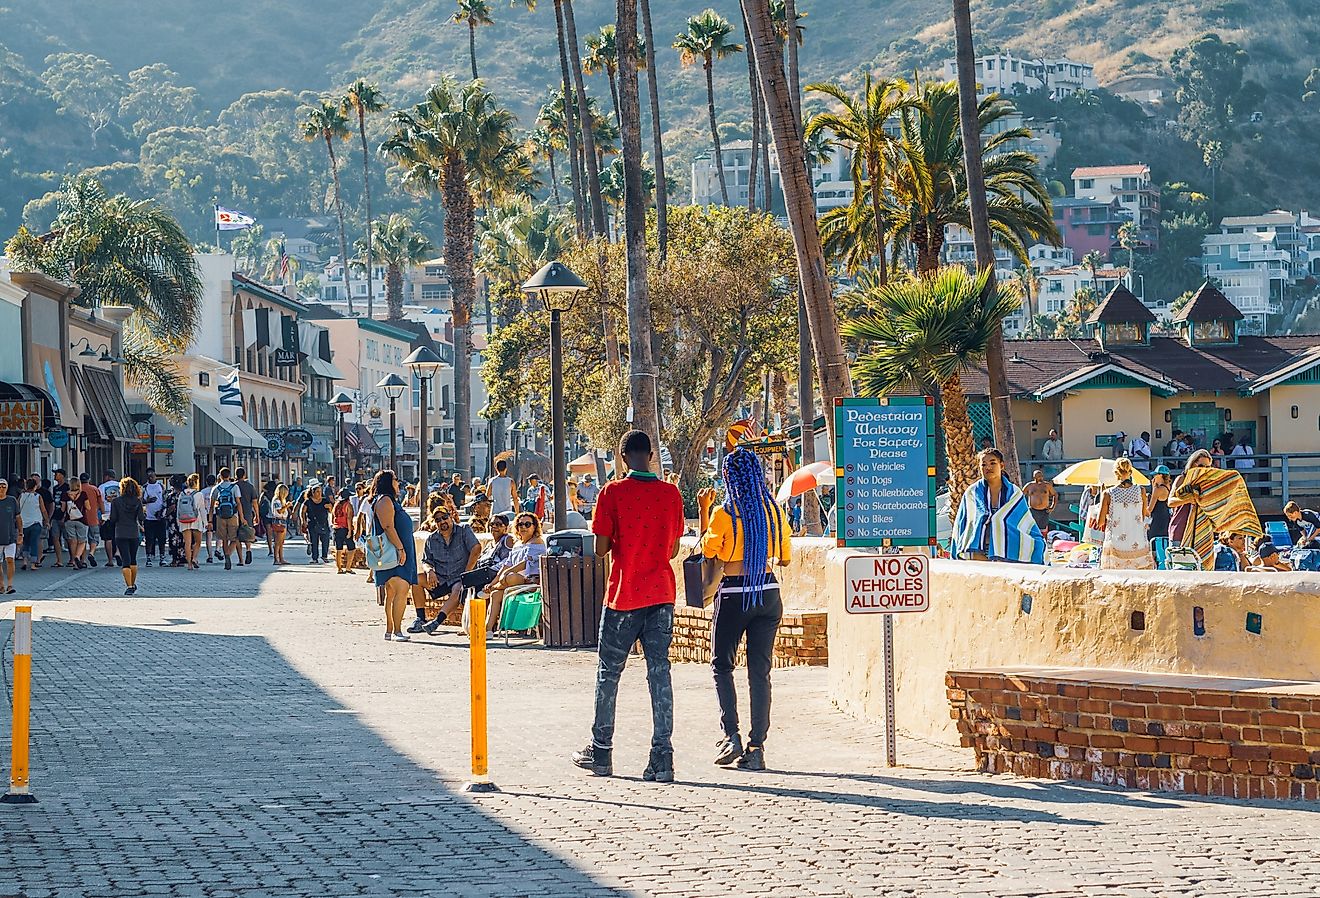 City of Avalon, the most visited tourist destination on Catalina Island, California is a perfect place to take a weekend escape. Image credit HannaTor via Shutterstock